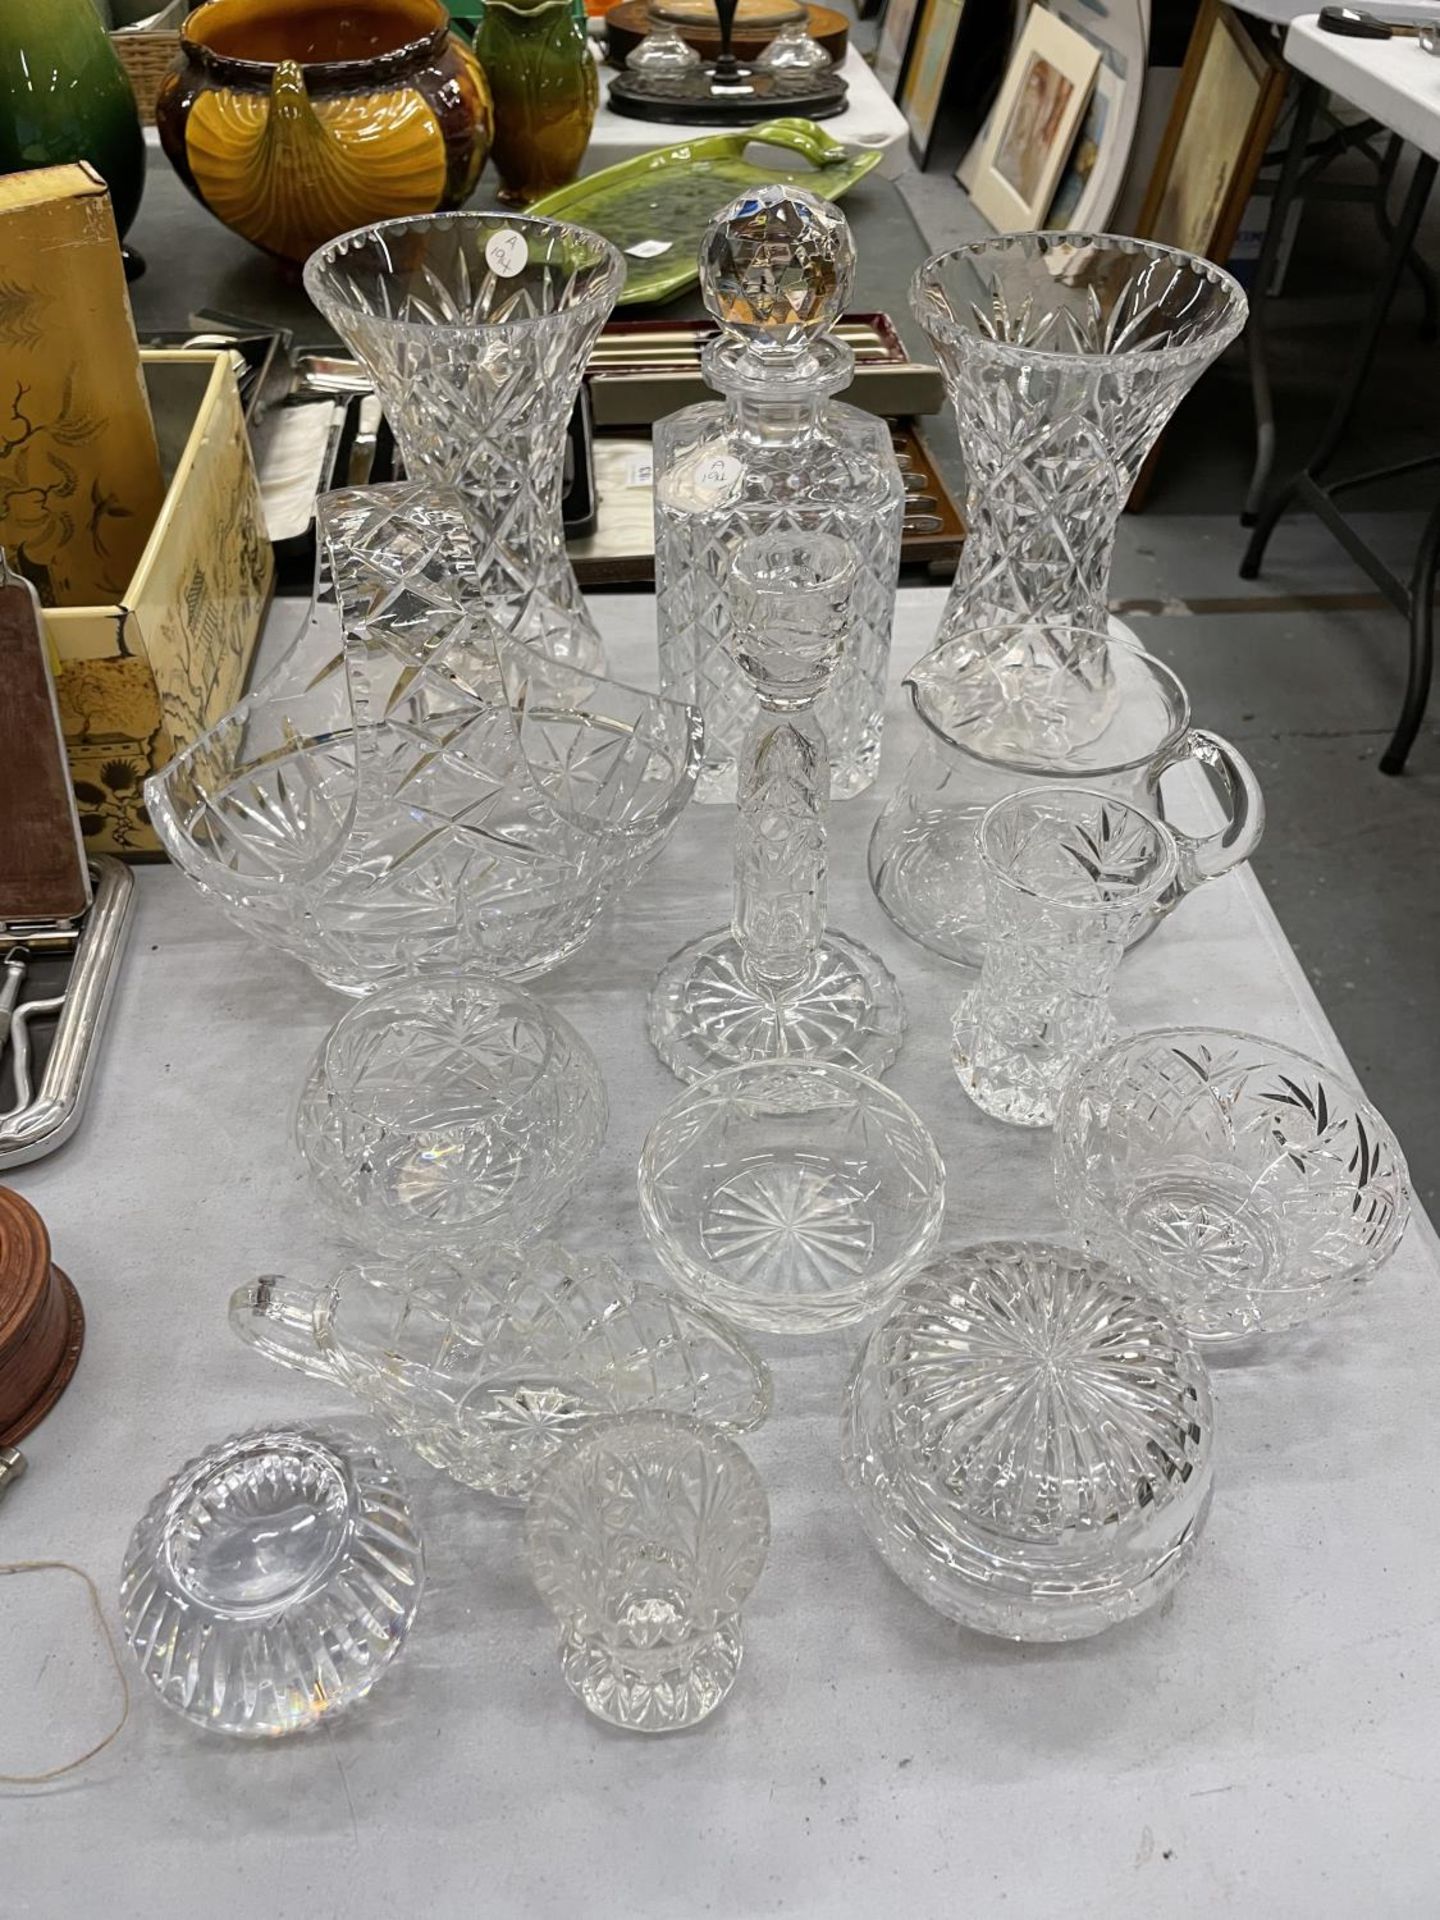 A QUANTITY OF GLASSWARE TO INCLUDE VASES, DECANTER, DISHES, JUGS, ETC